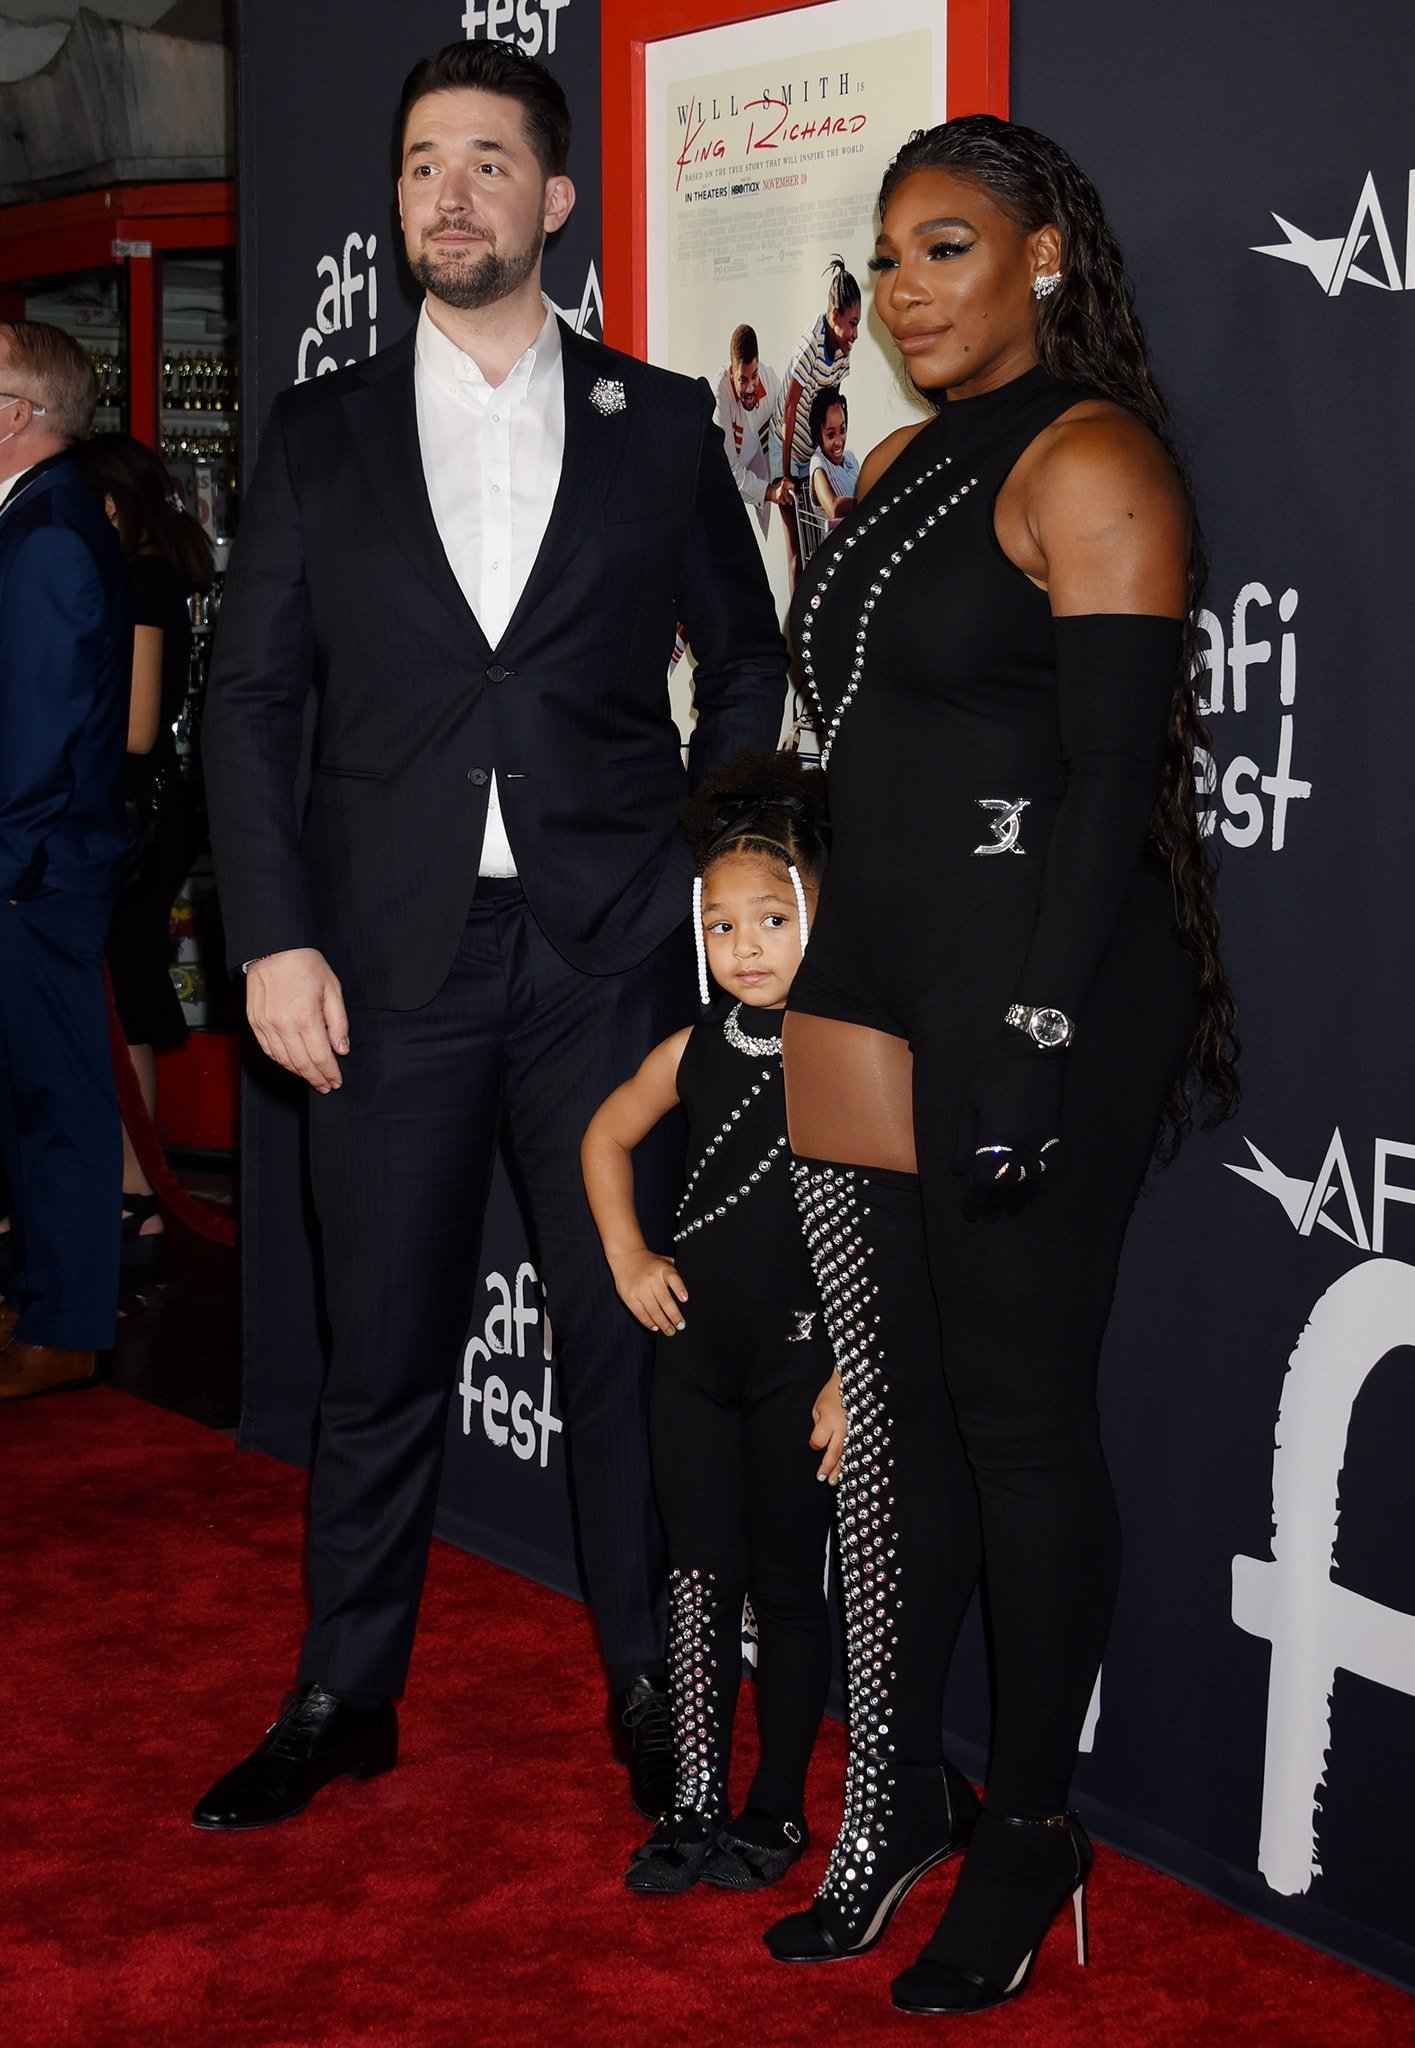 Serena Williams and her daughter Olympia twin in custom David Koma embellished outfits